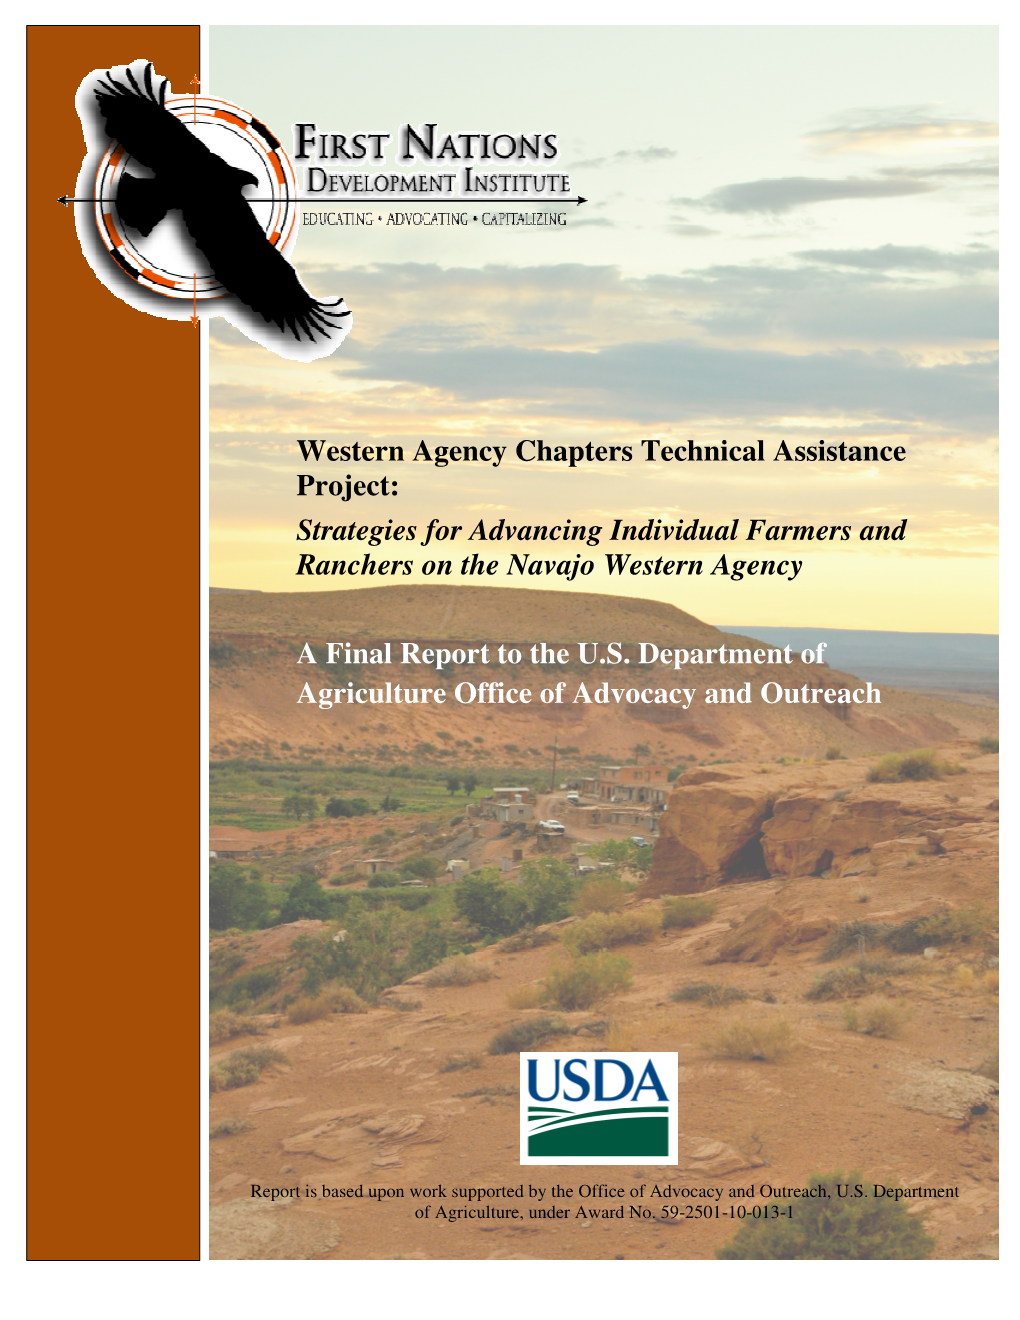 Western Agency Chapters Technical Assistance Project